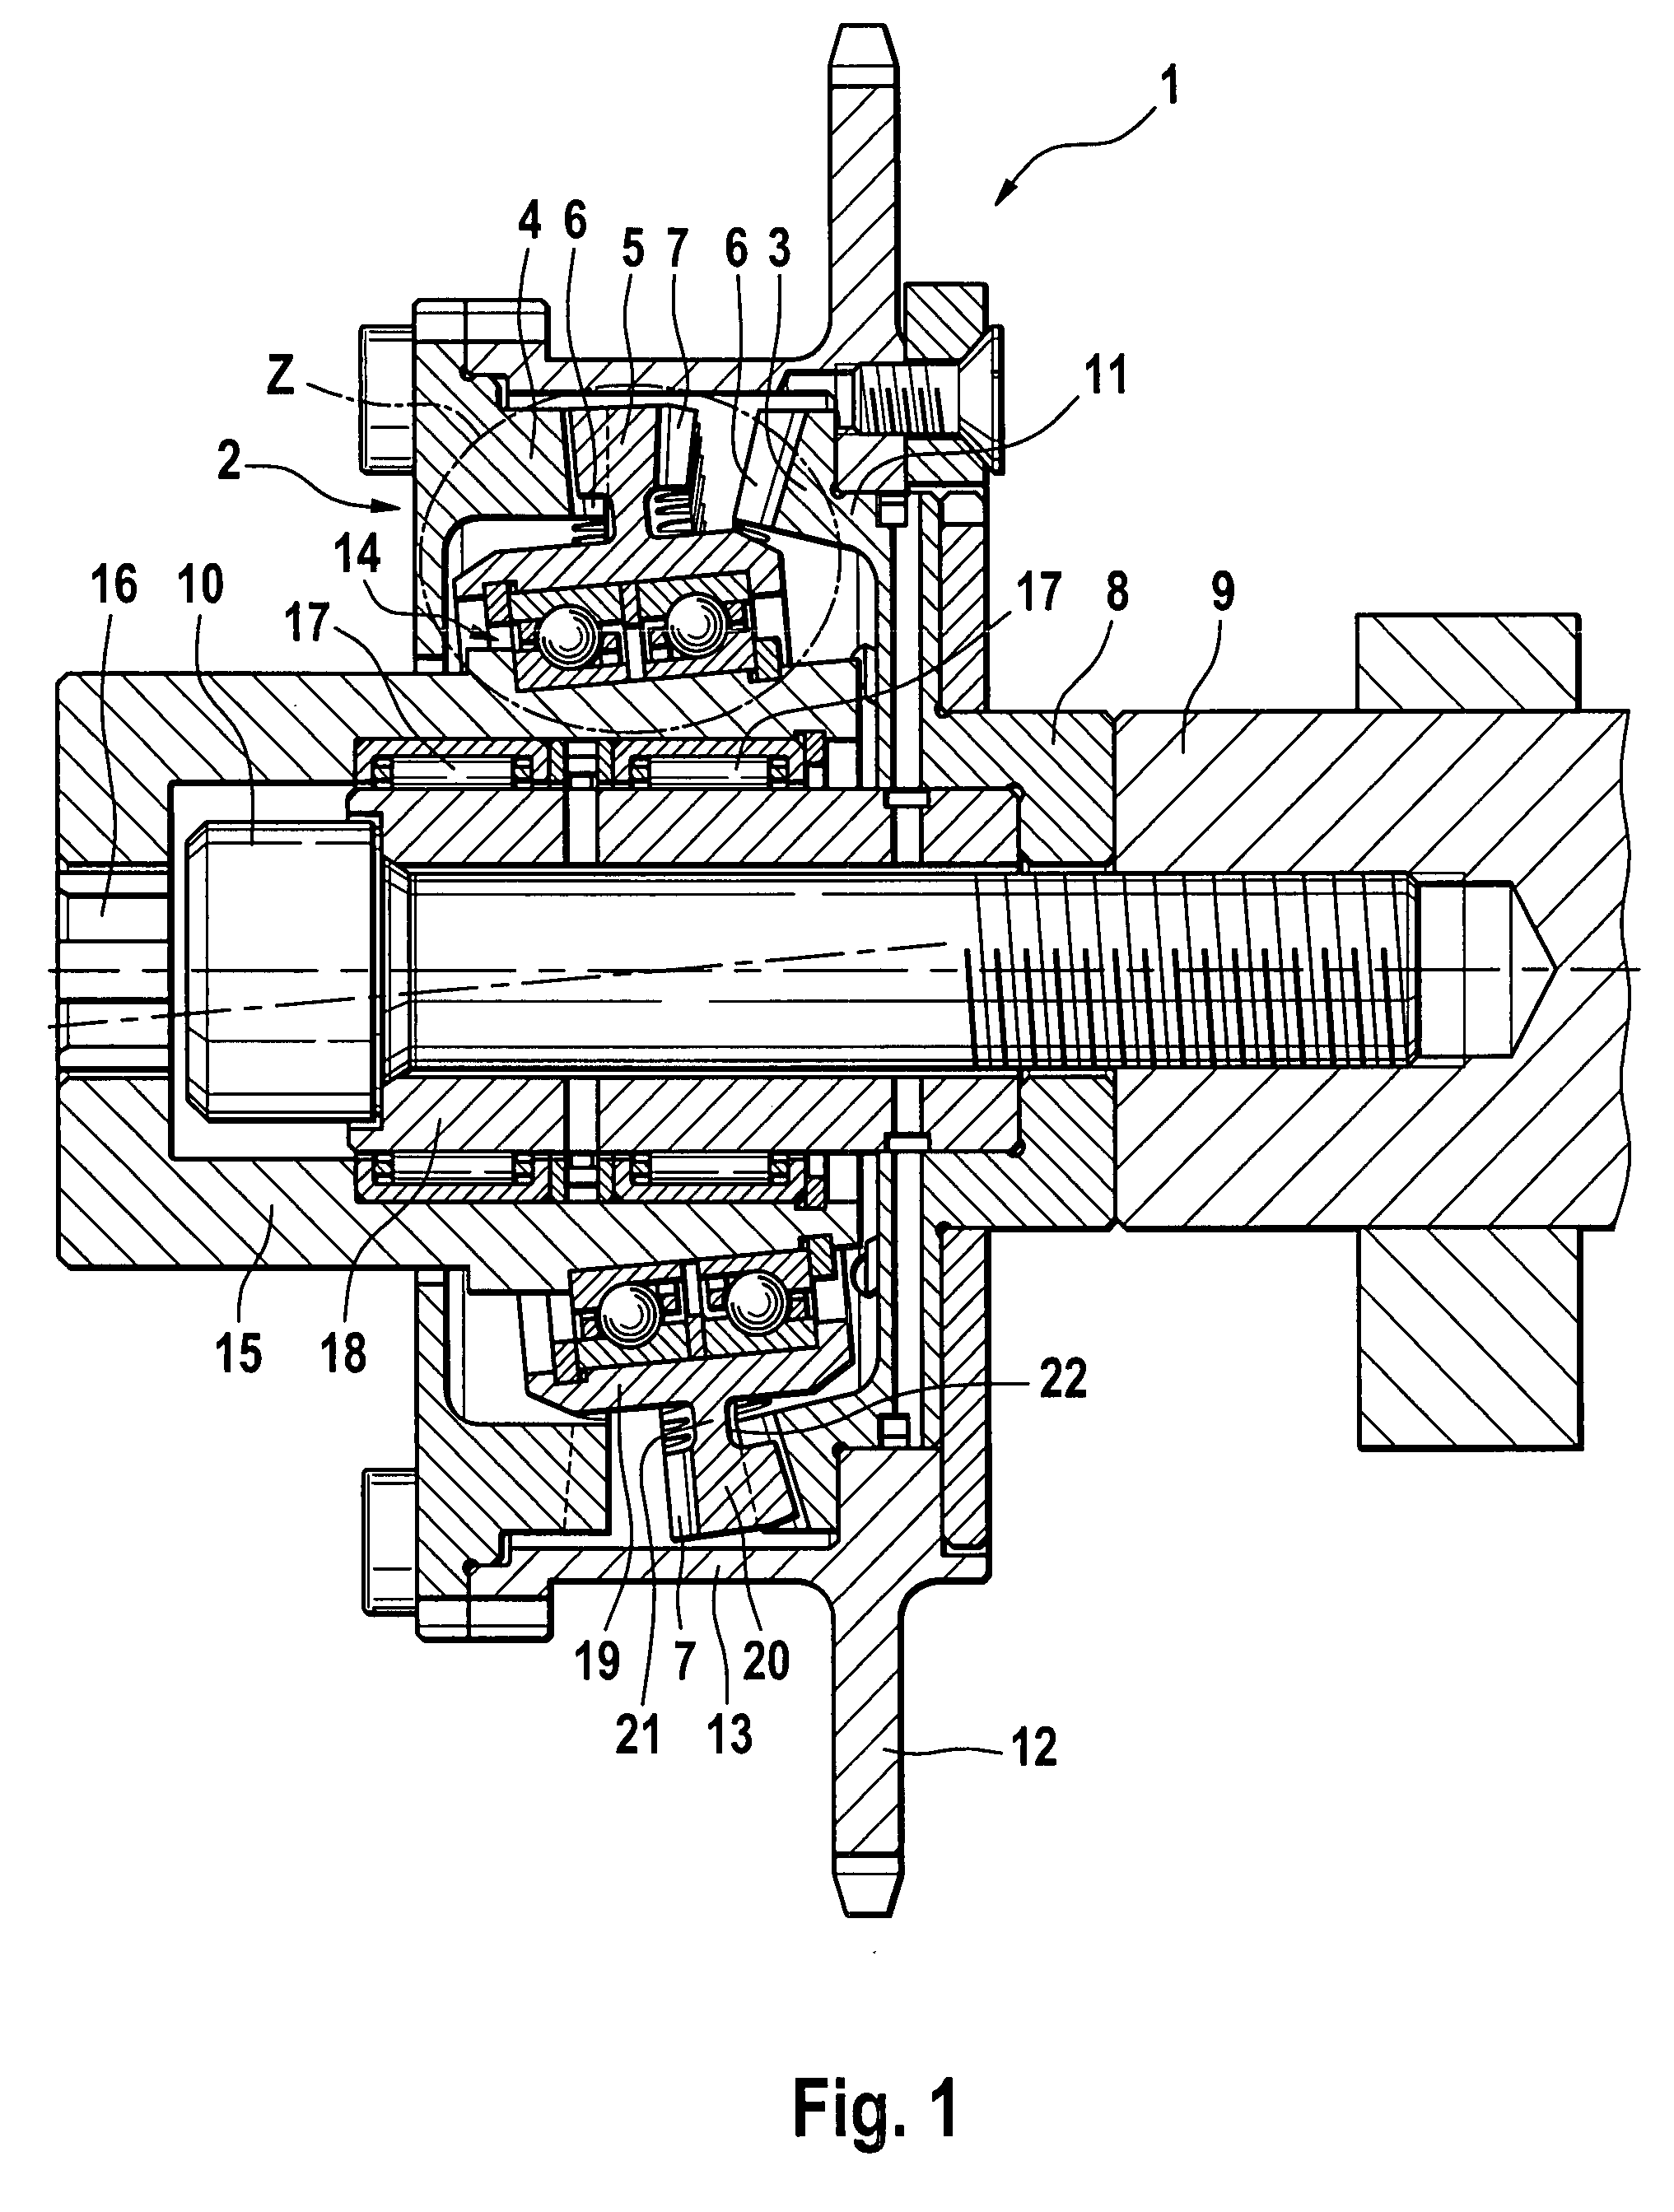 Device For Varying The Control Times Of An Internal Combustion Engine